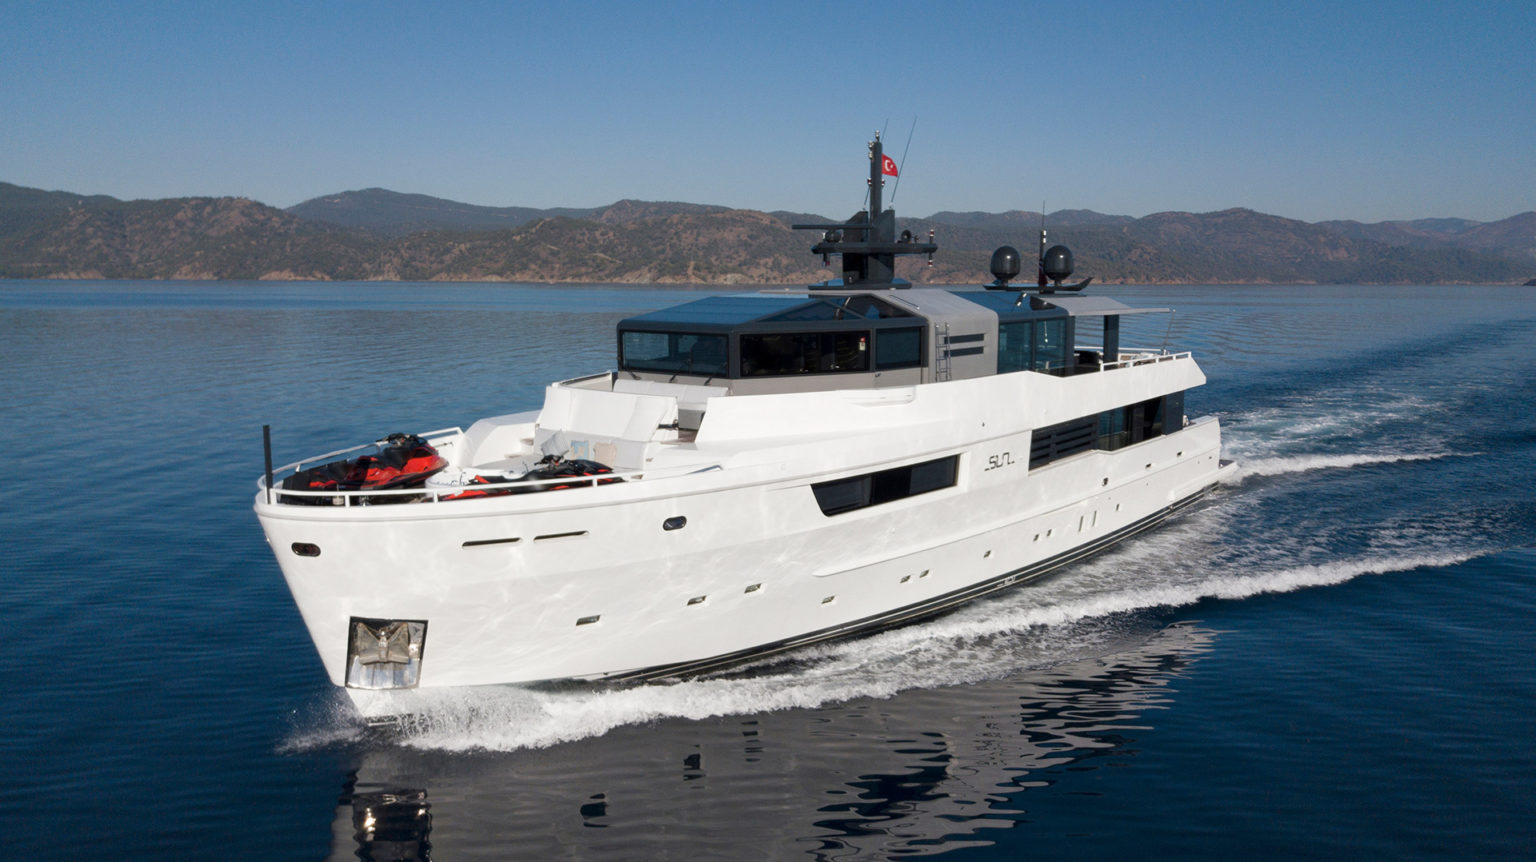 private yacht manufacturers